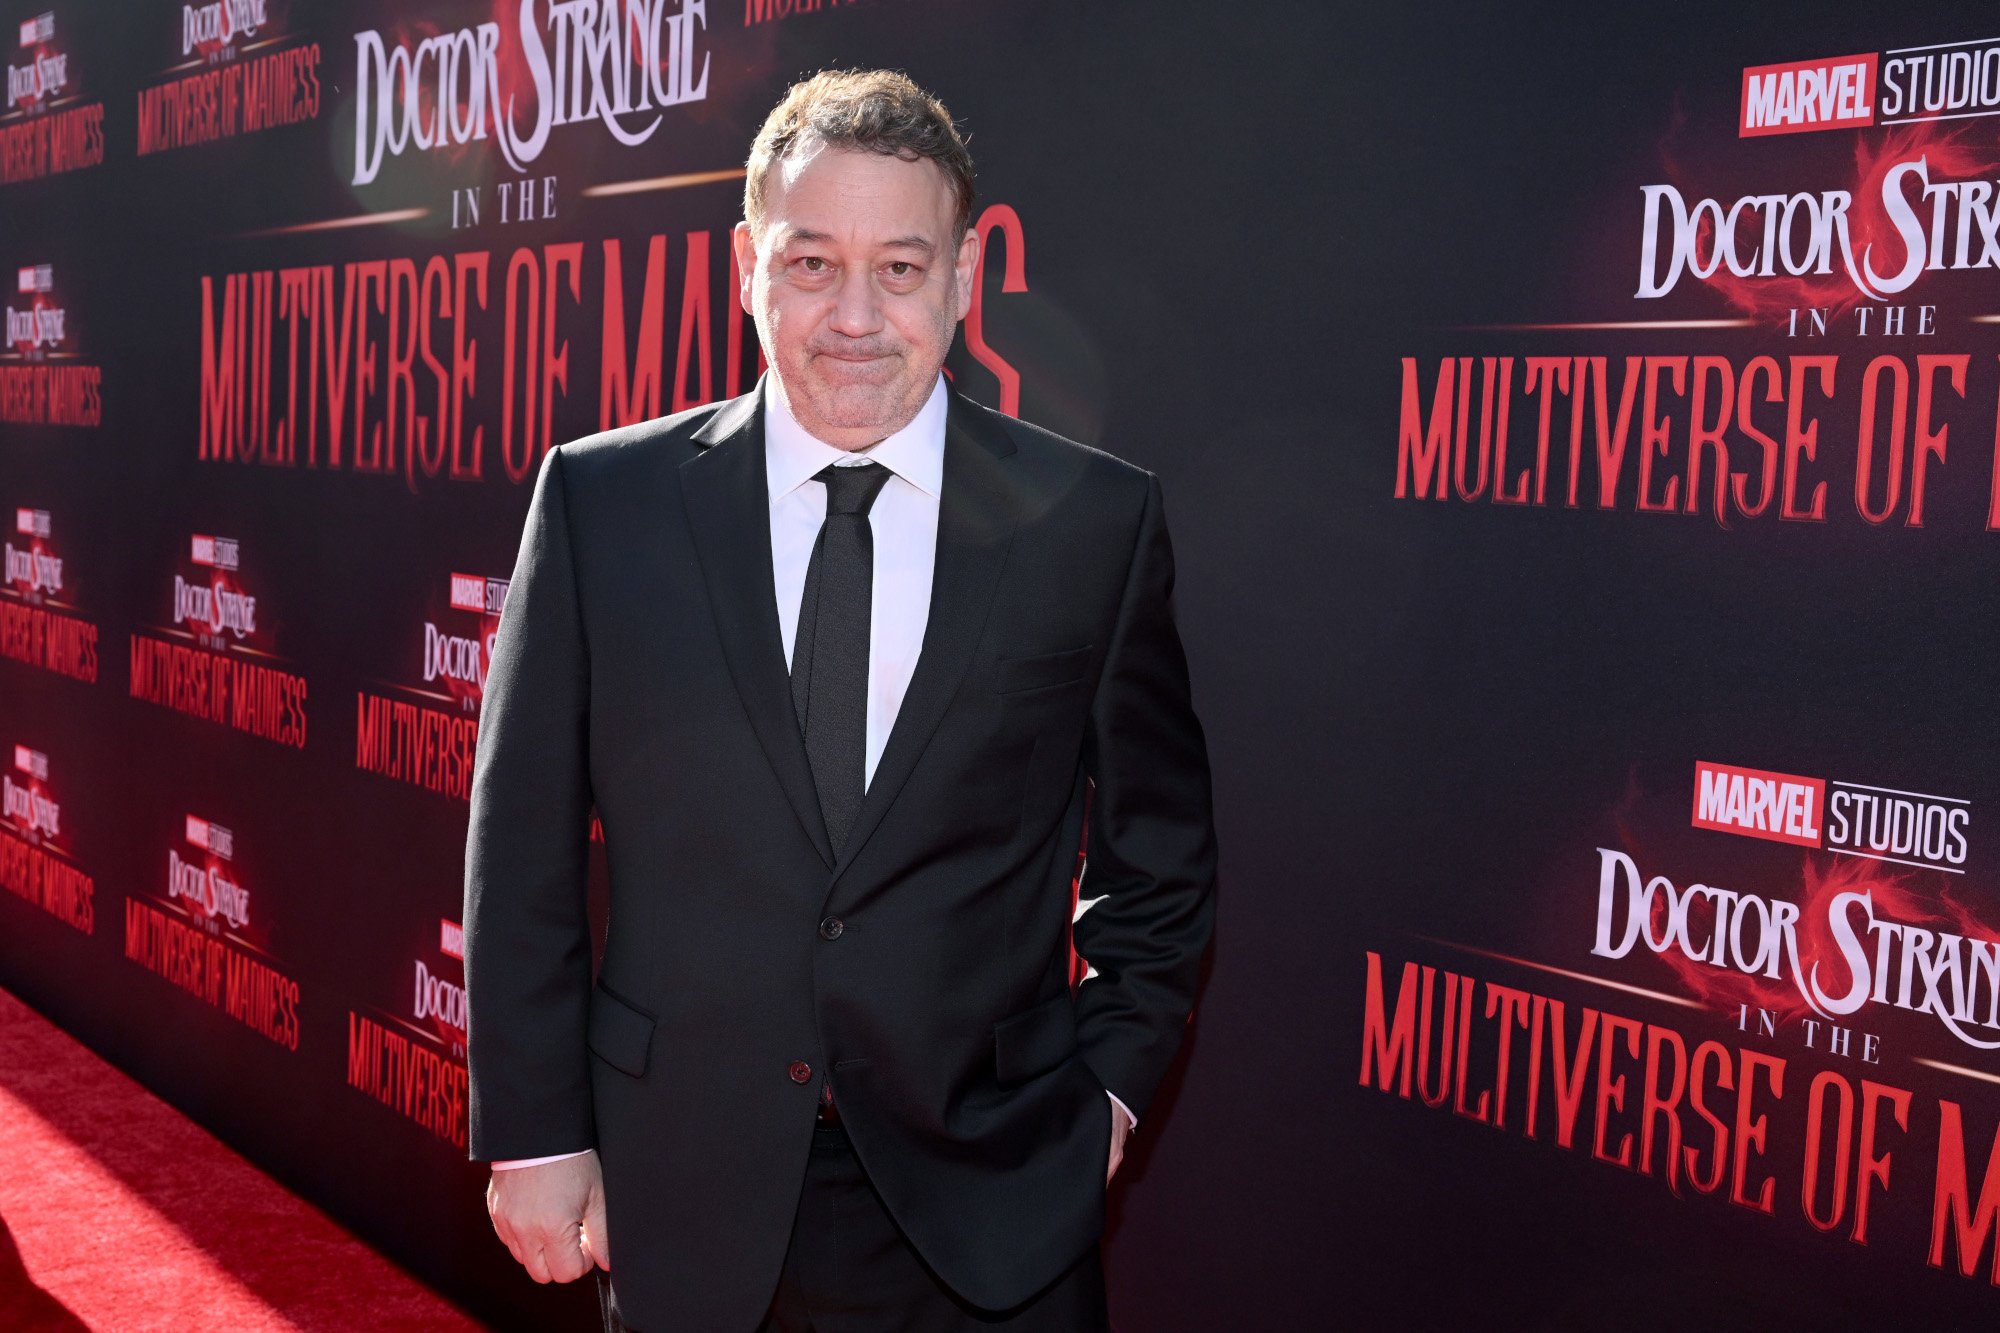 Sam Raimi, who directed 'Doctor Strange 2' and the Tobey Maguire 'Spider-Man' movies. He's on the red carpet at the 'Doctor Strange in the Multiverse of Madness' premiere, and he's wearing a white shirt and black suit.